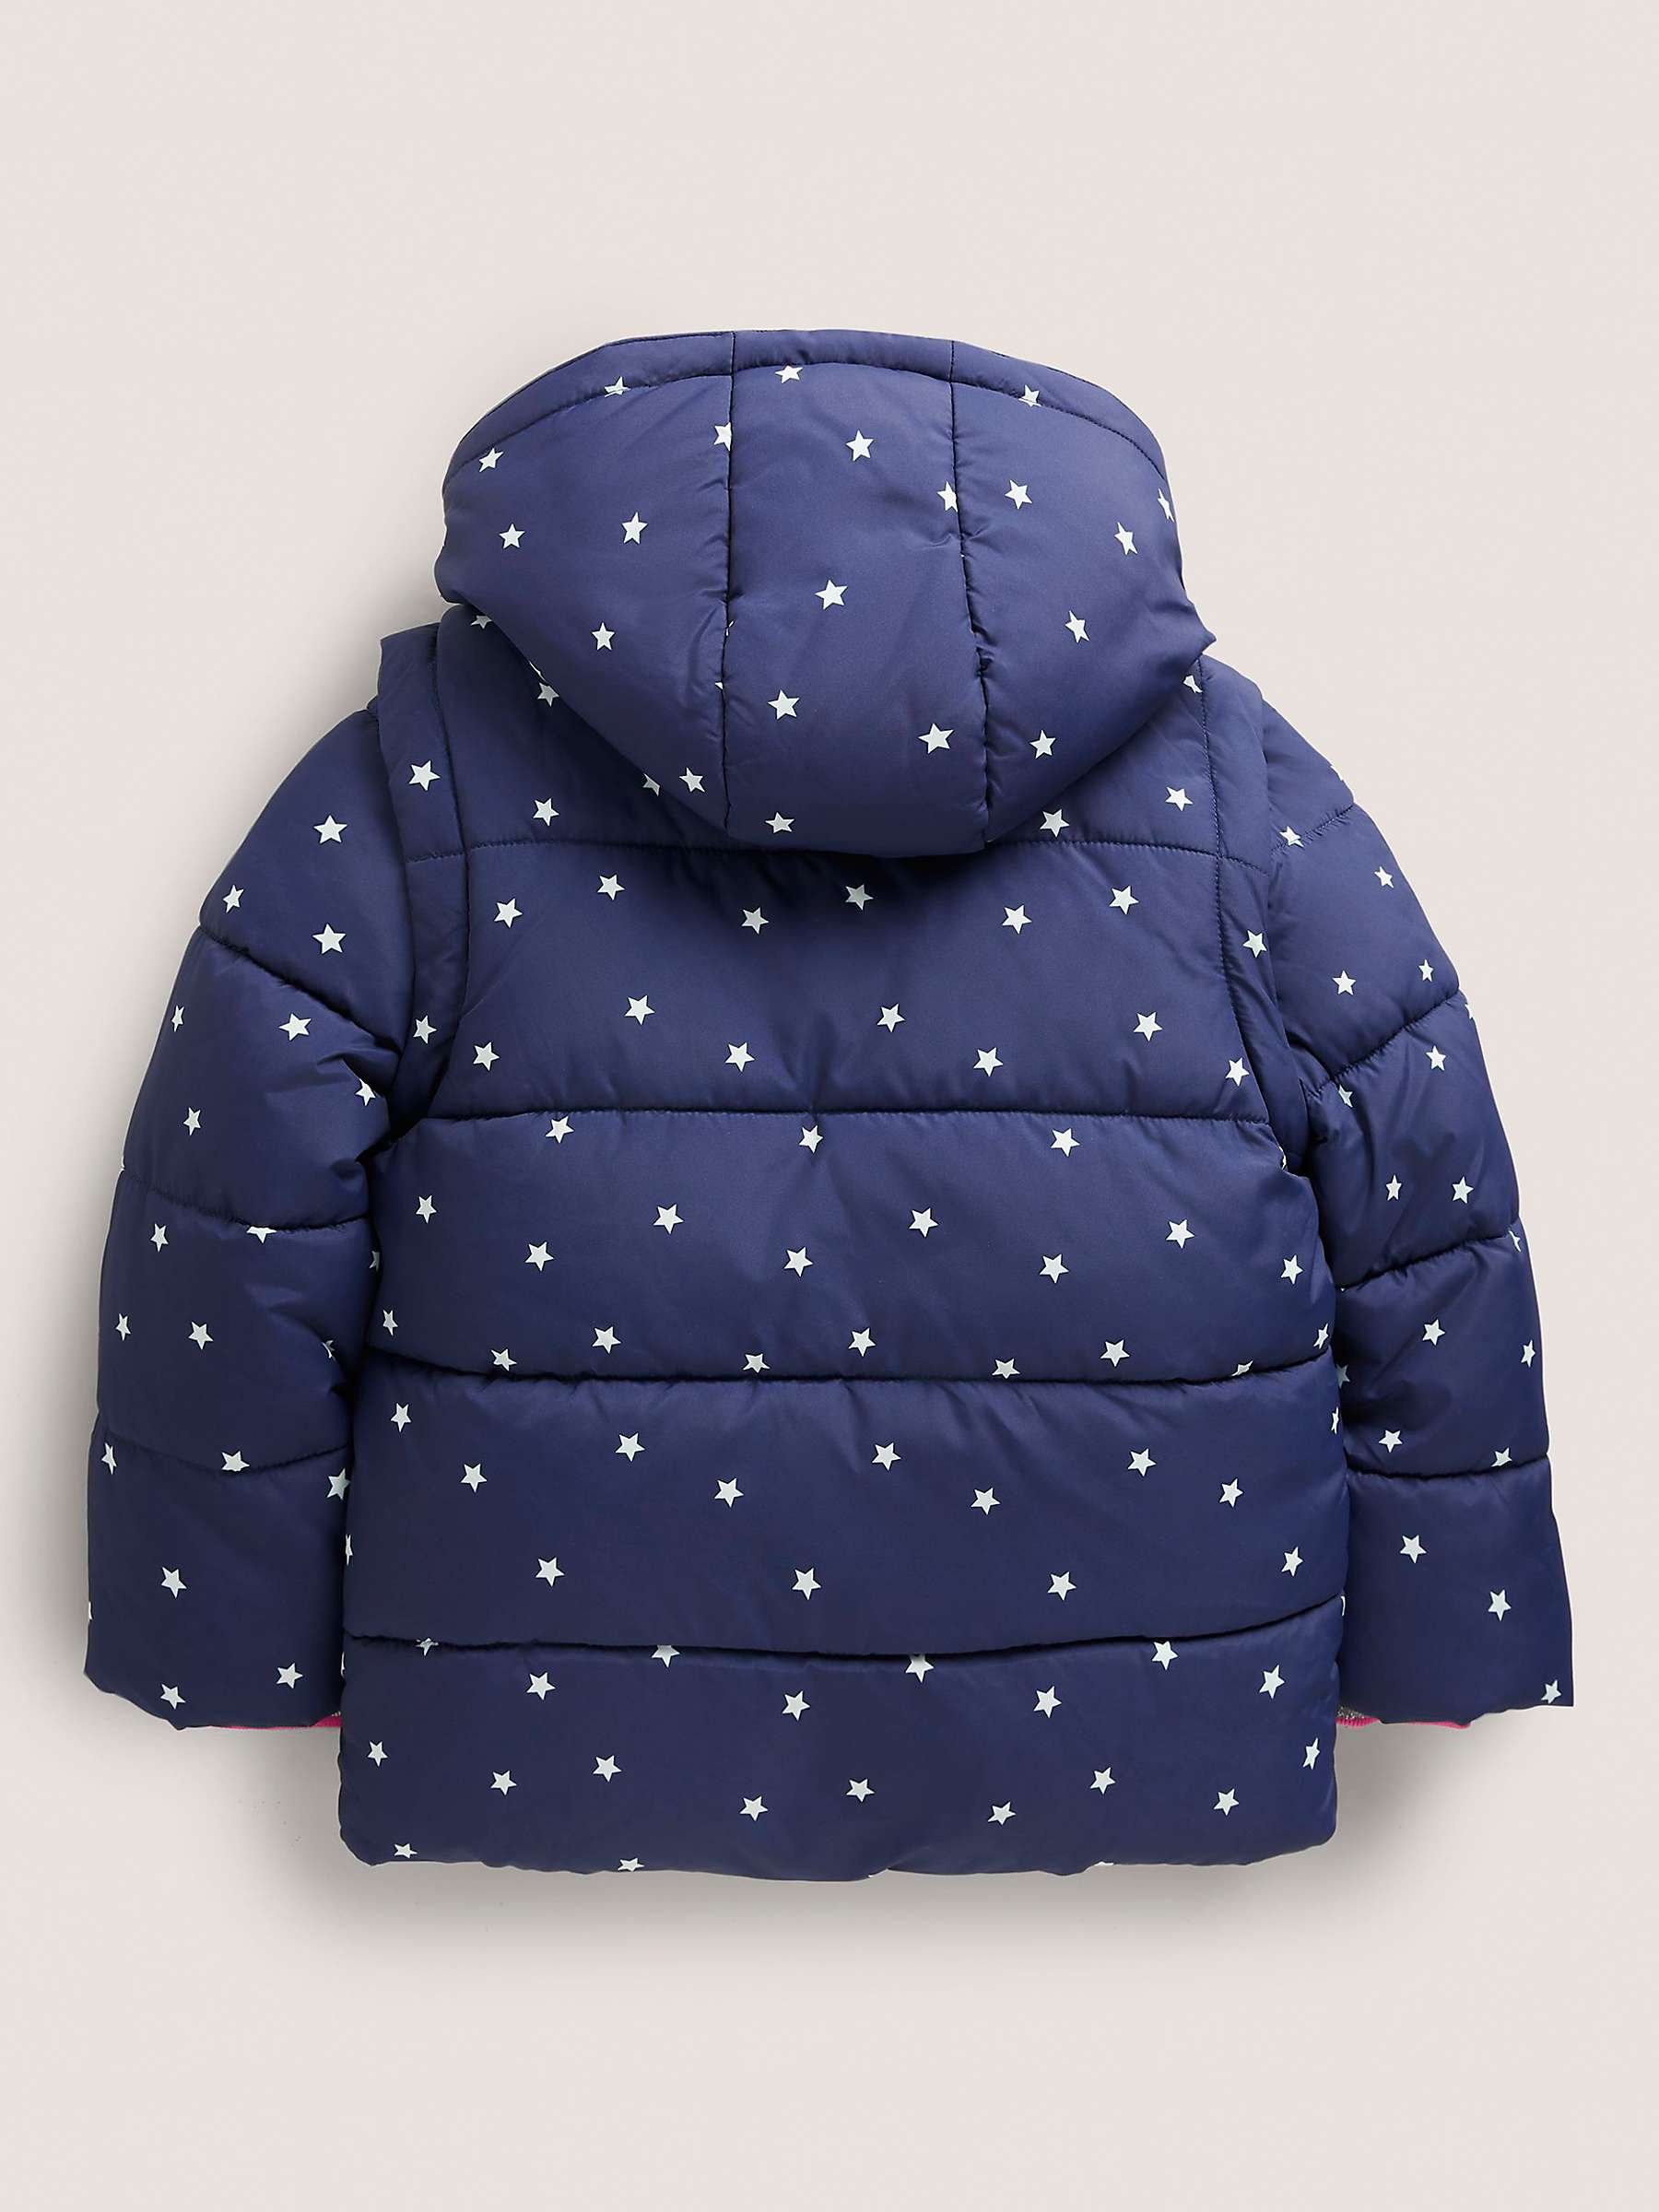 Mini Boden Kids' Confetti Star Quilted Jacket, Navy at John Lewis & Partners